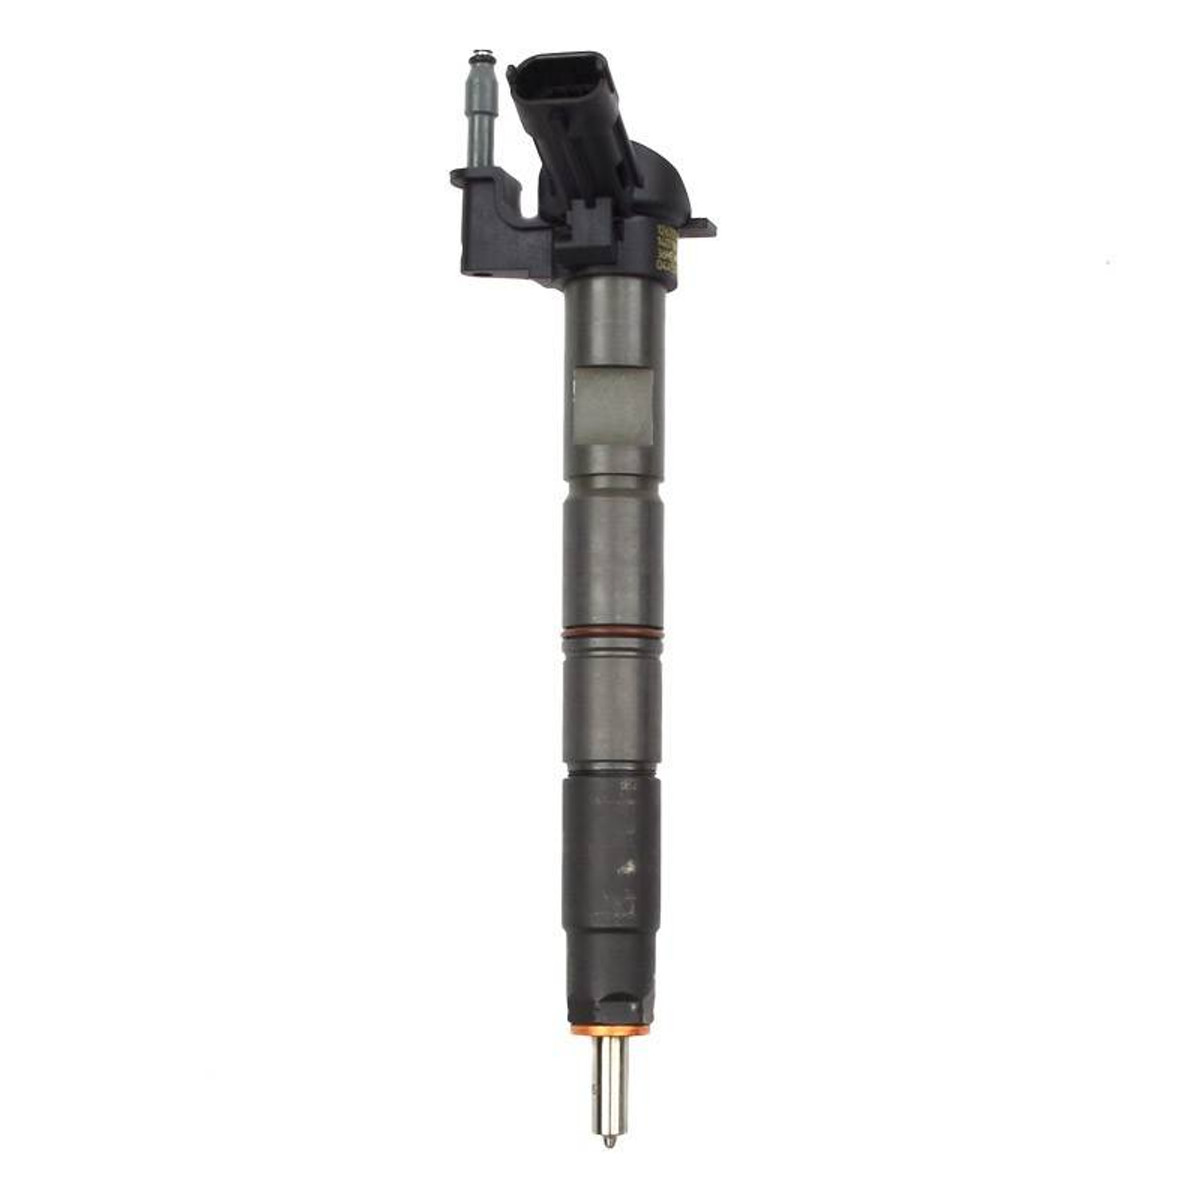 Factory OEM Remanufactured RACE6 100% Over 6.6L 2011-2016 LML Duramax Injector 34LPM 0986435410-R6